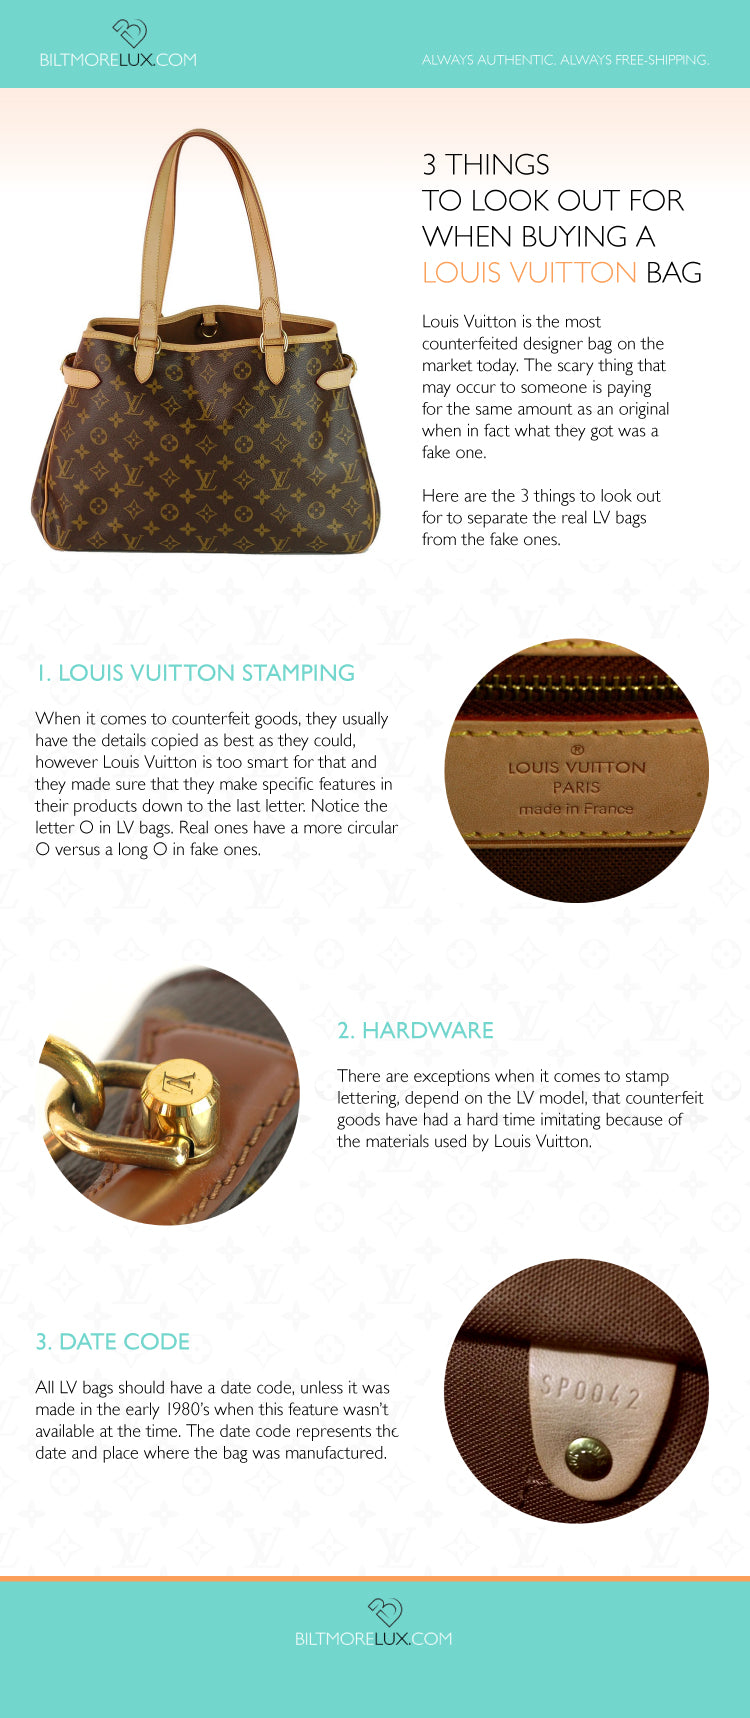 UNPOPULAR OPINION  Why You Should Skip Buying the Louis Vuitton